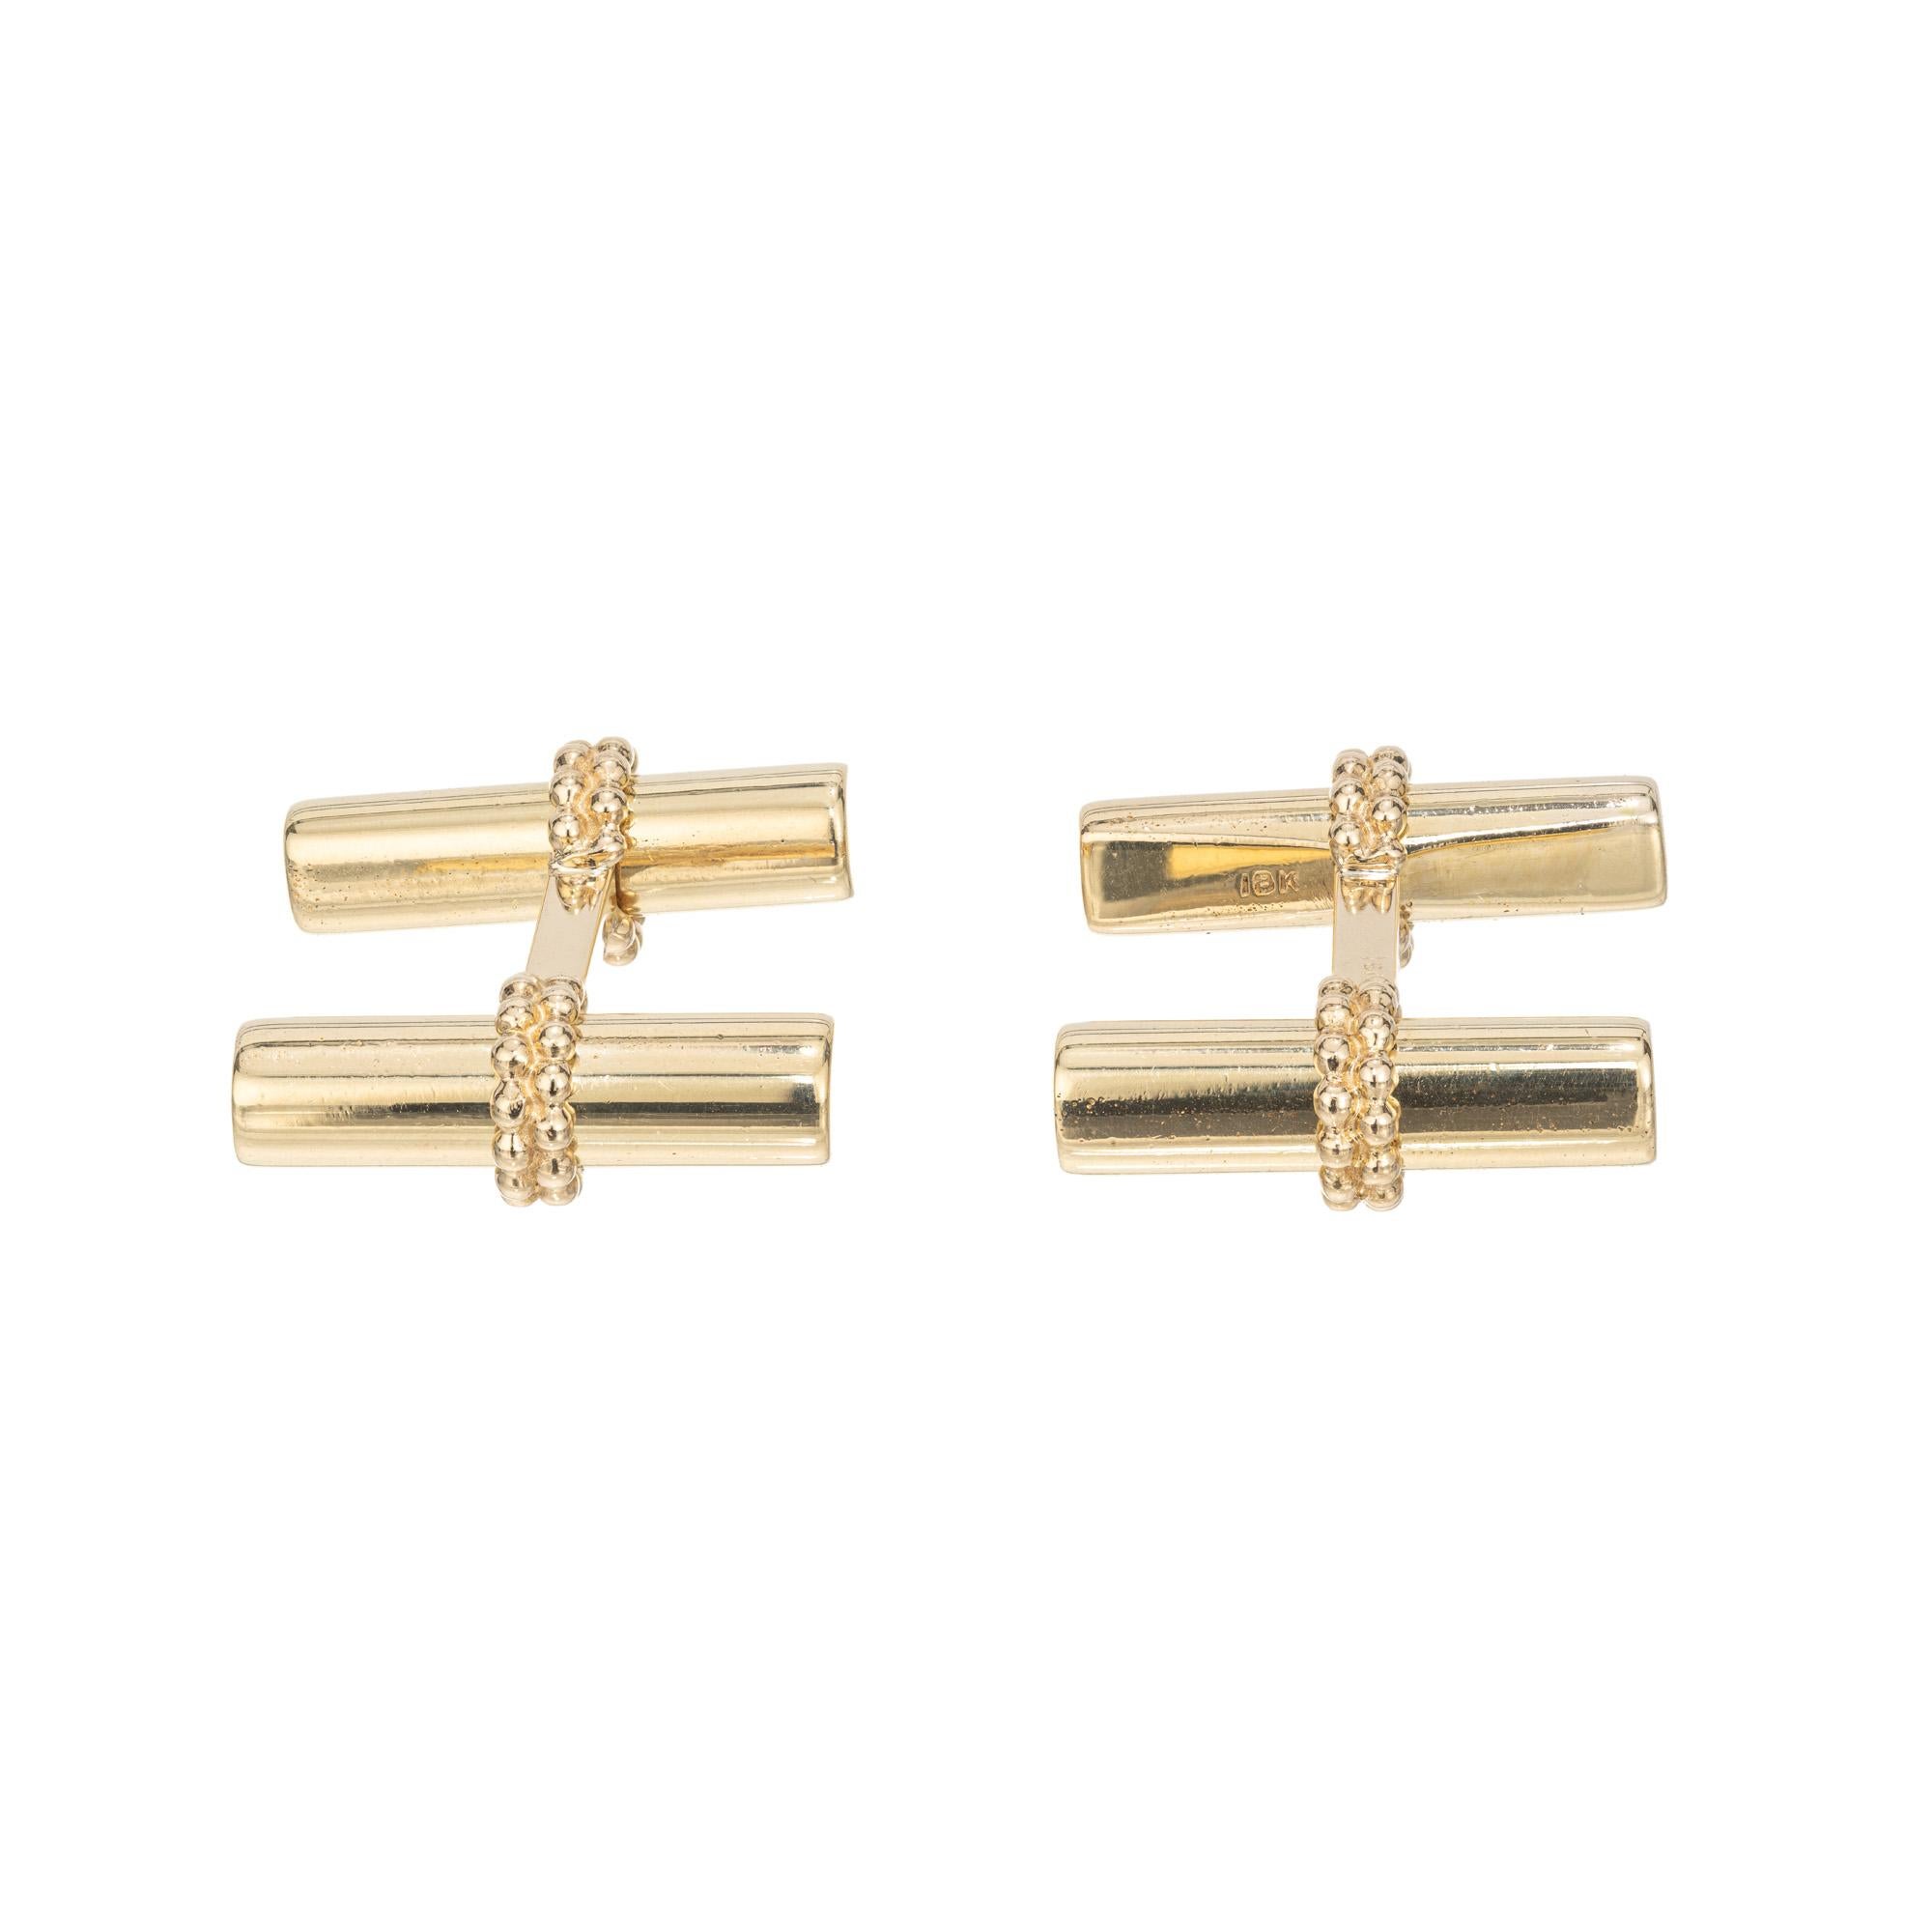 1970's Men's 18k yellow gold cufflinks. These interchangeable cufflinks can be made up to 7 complete sets polished natural gemstone bars. 1 set of gold interchangeable 18k bars. The gemstone bars include, Coral, Hematite, Onyx, Chrysoprase, Tiger